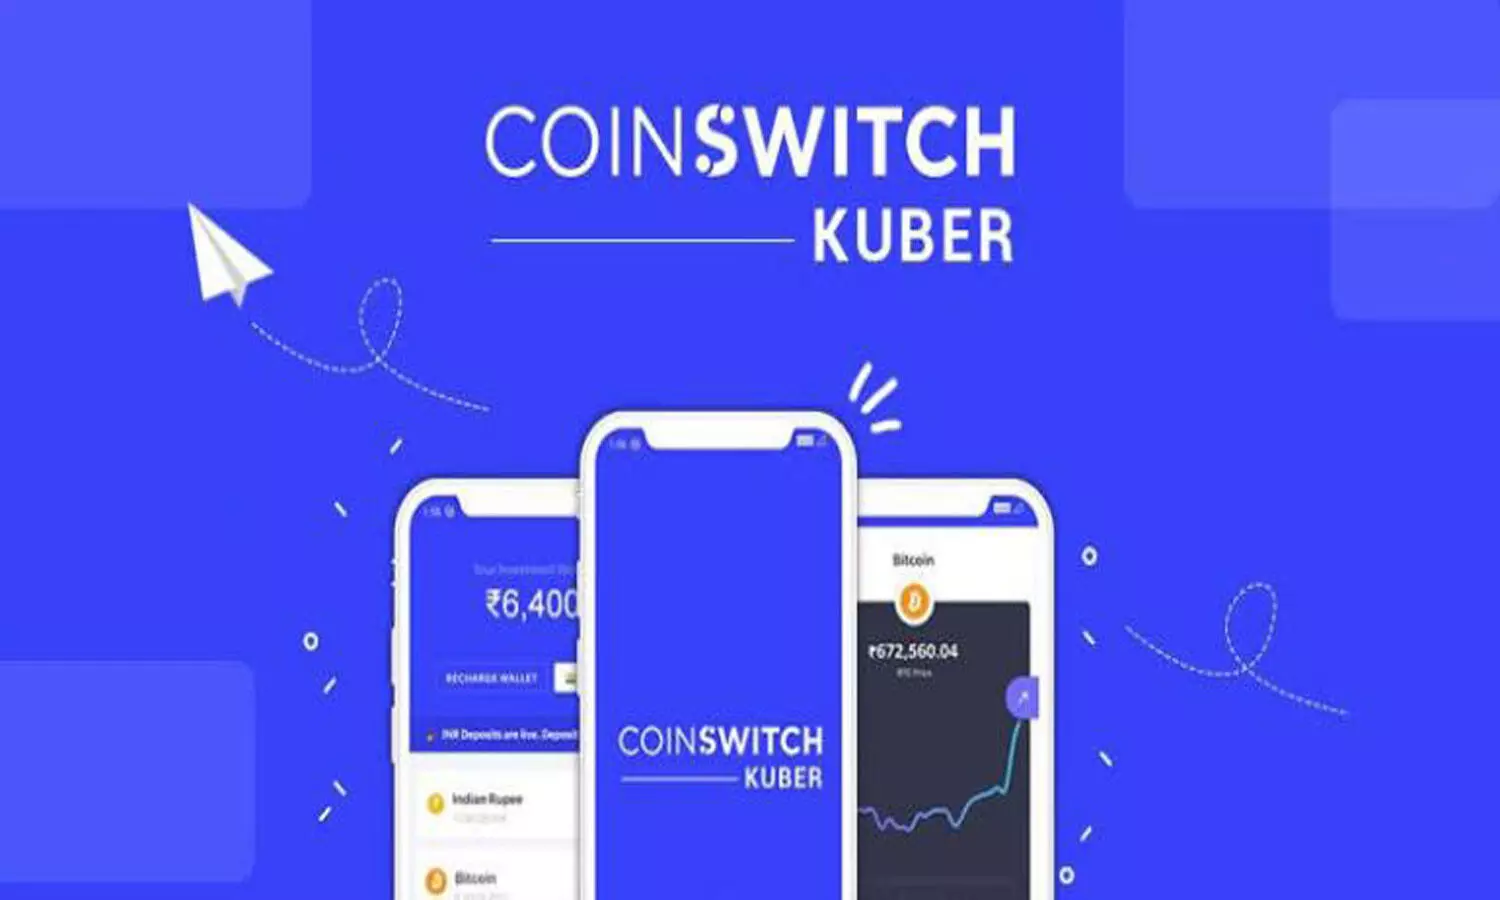 CoinSwitch Kuber faces the brunt of Twitters disappointment after it disables the withdrawal feature